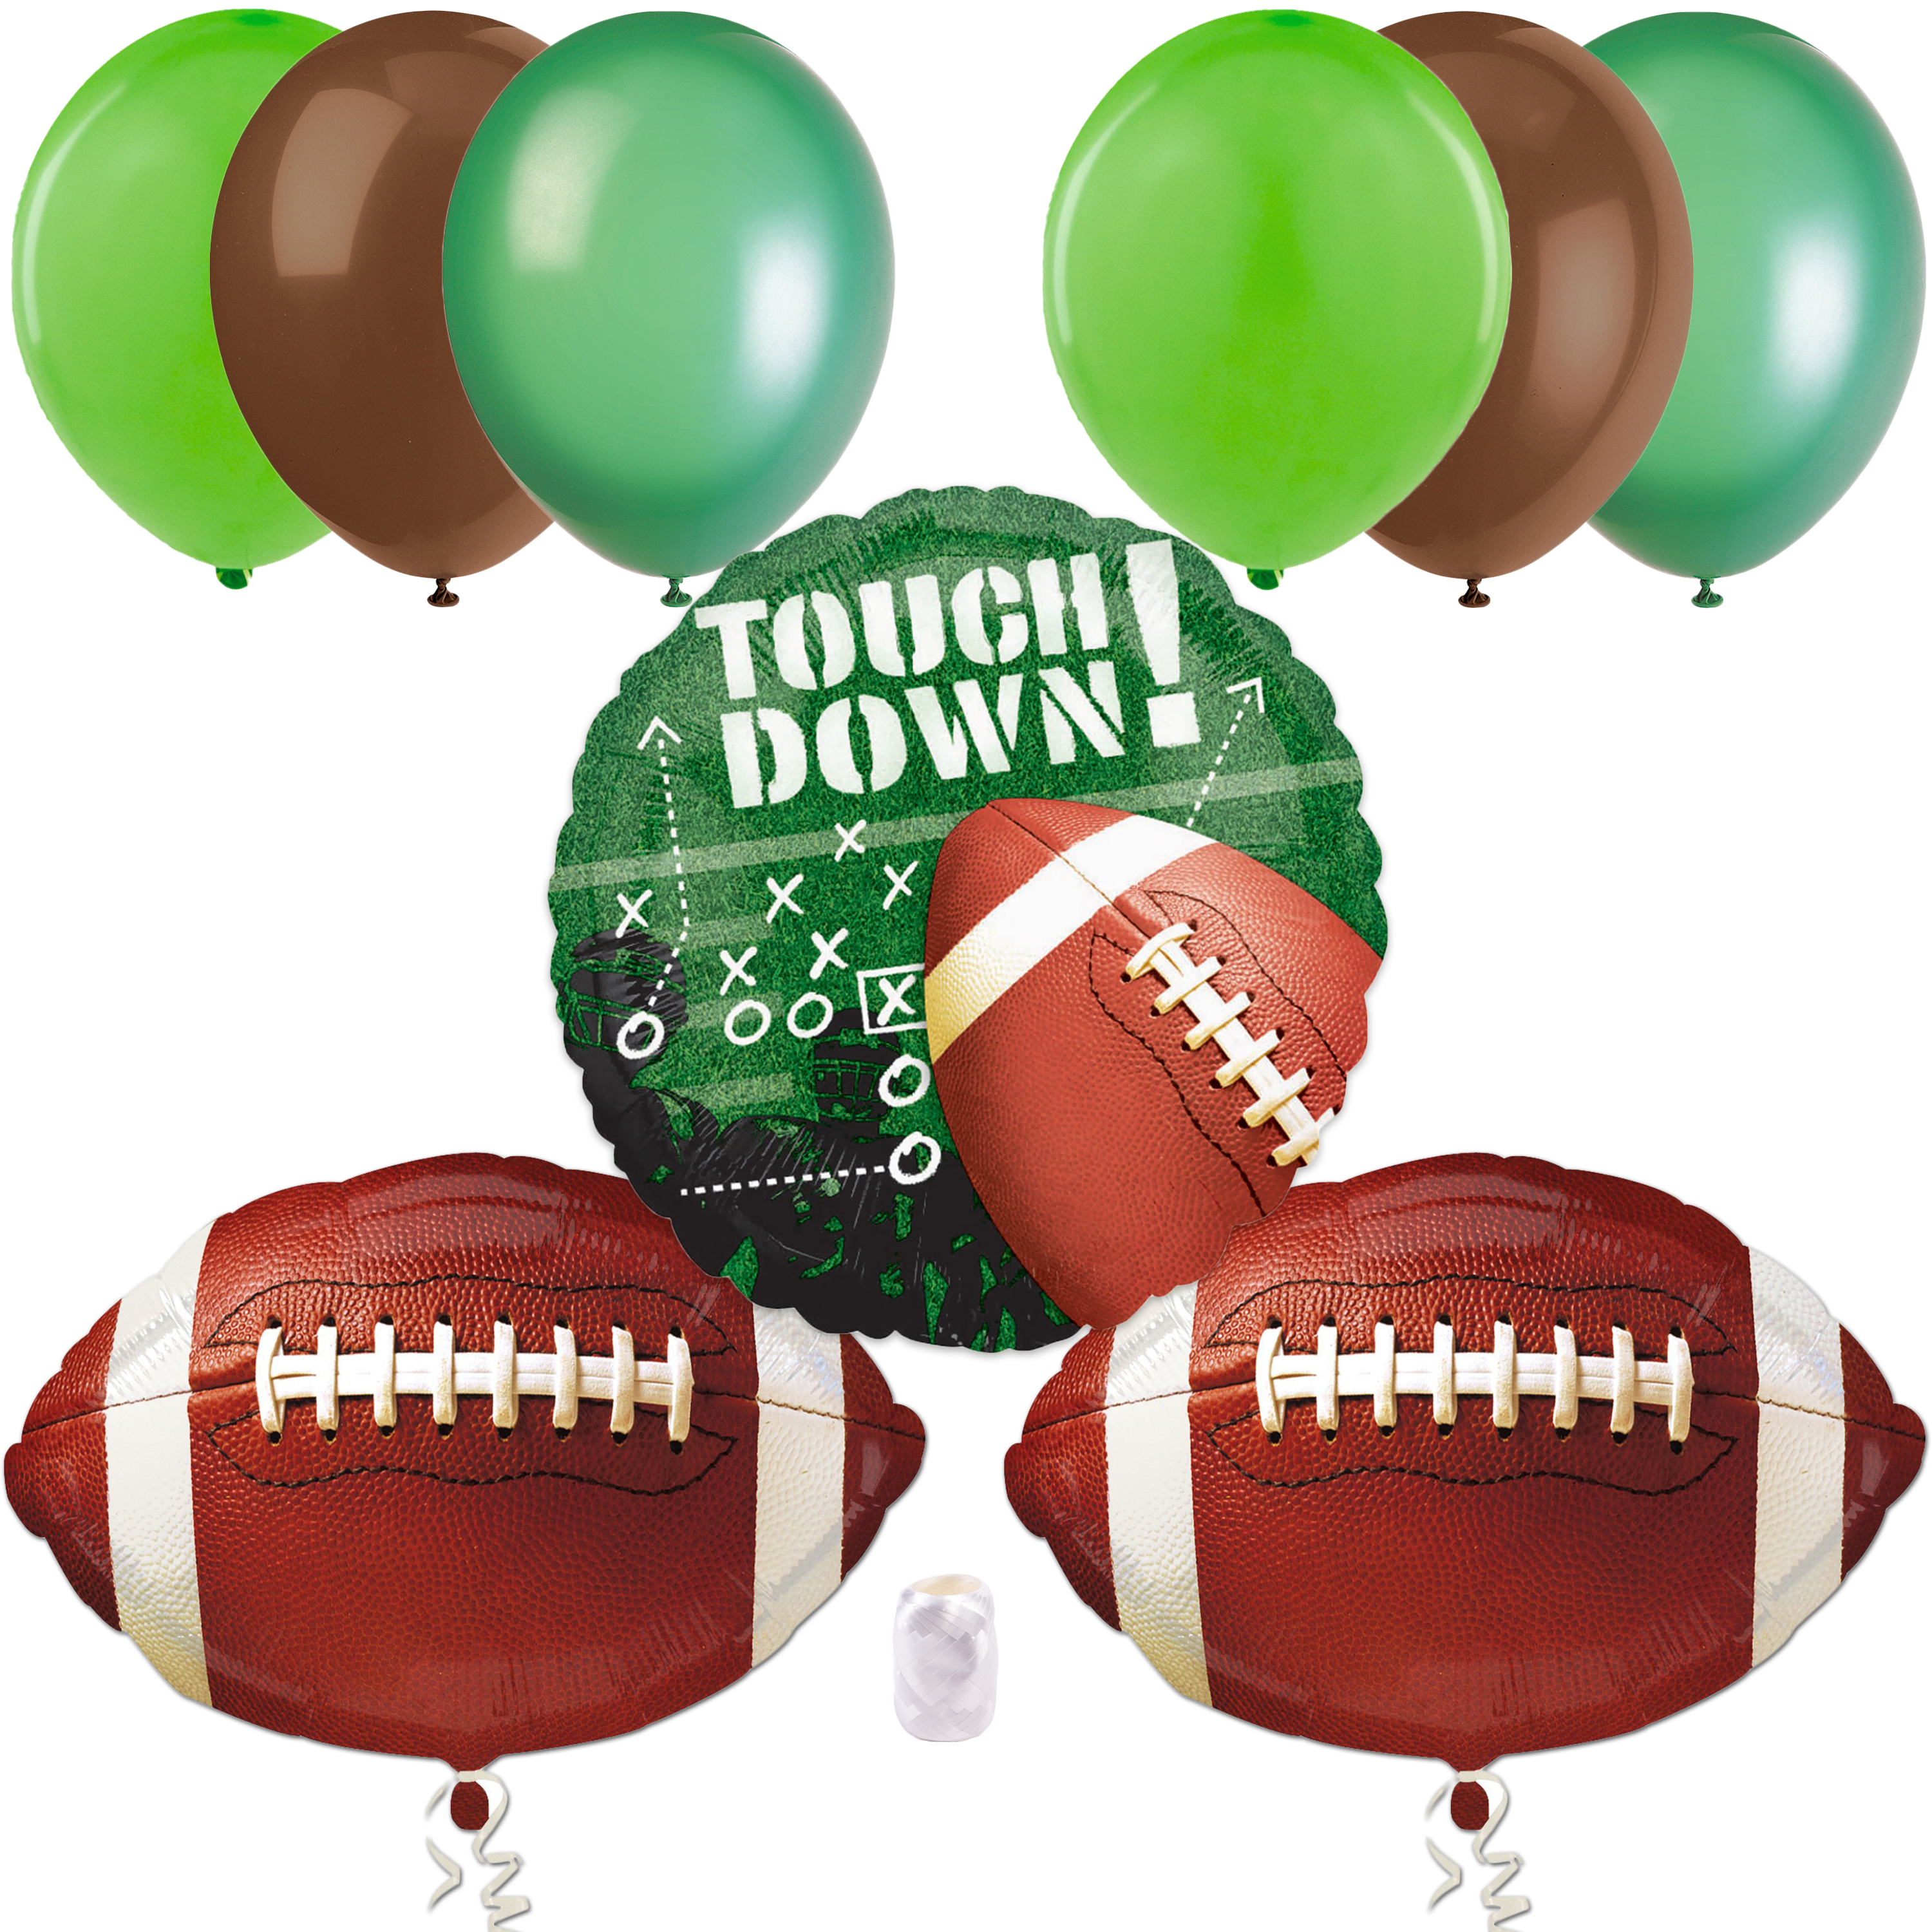 Football Frenzy Party Starter Decoration Bouquet Balloon Pack, 9pc, Green Brown - image 1 of 1